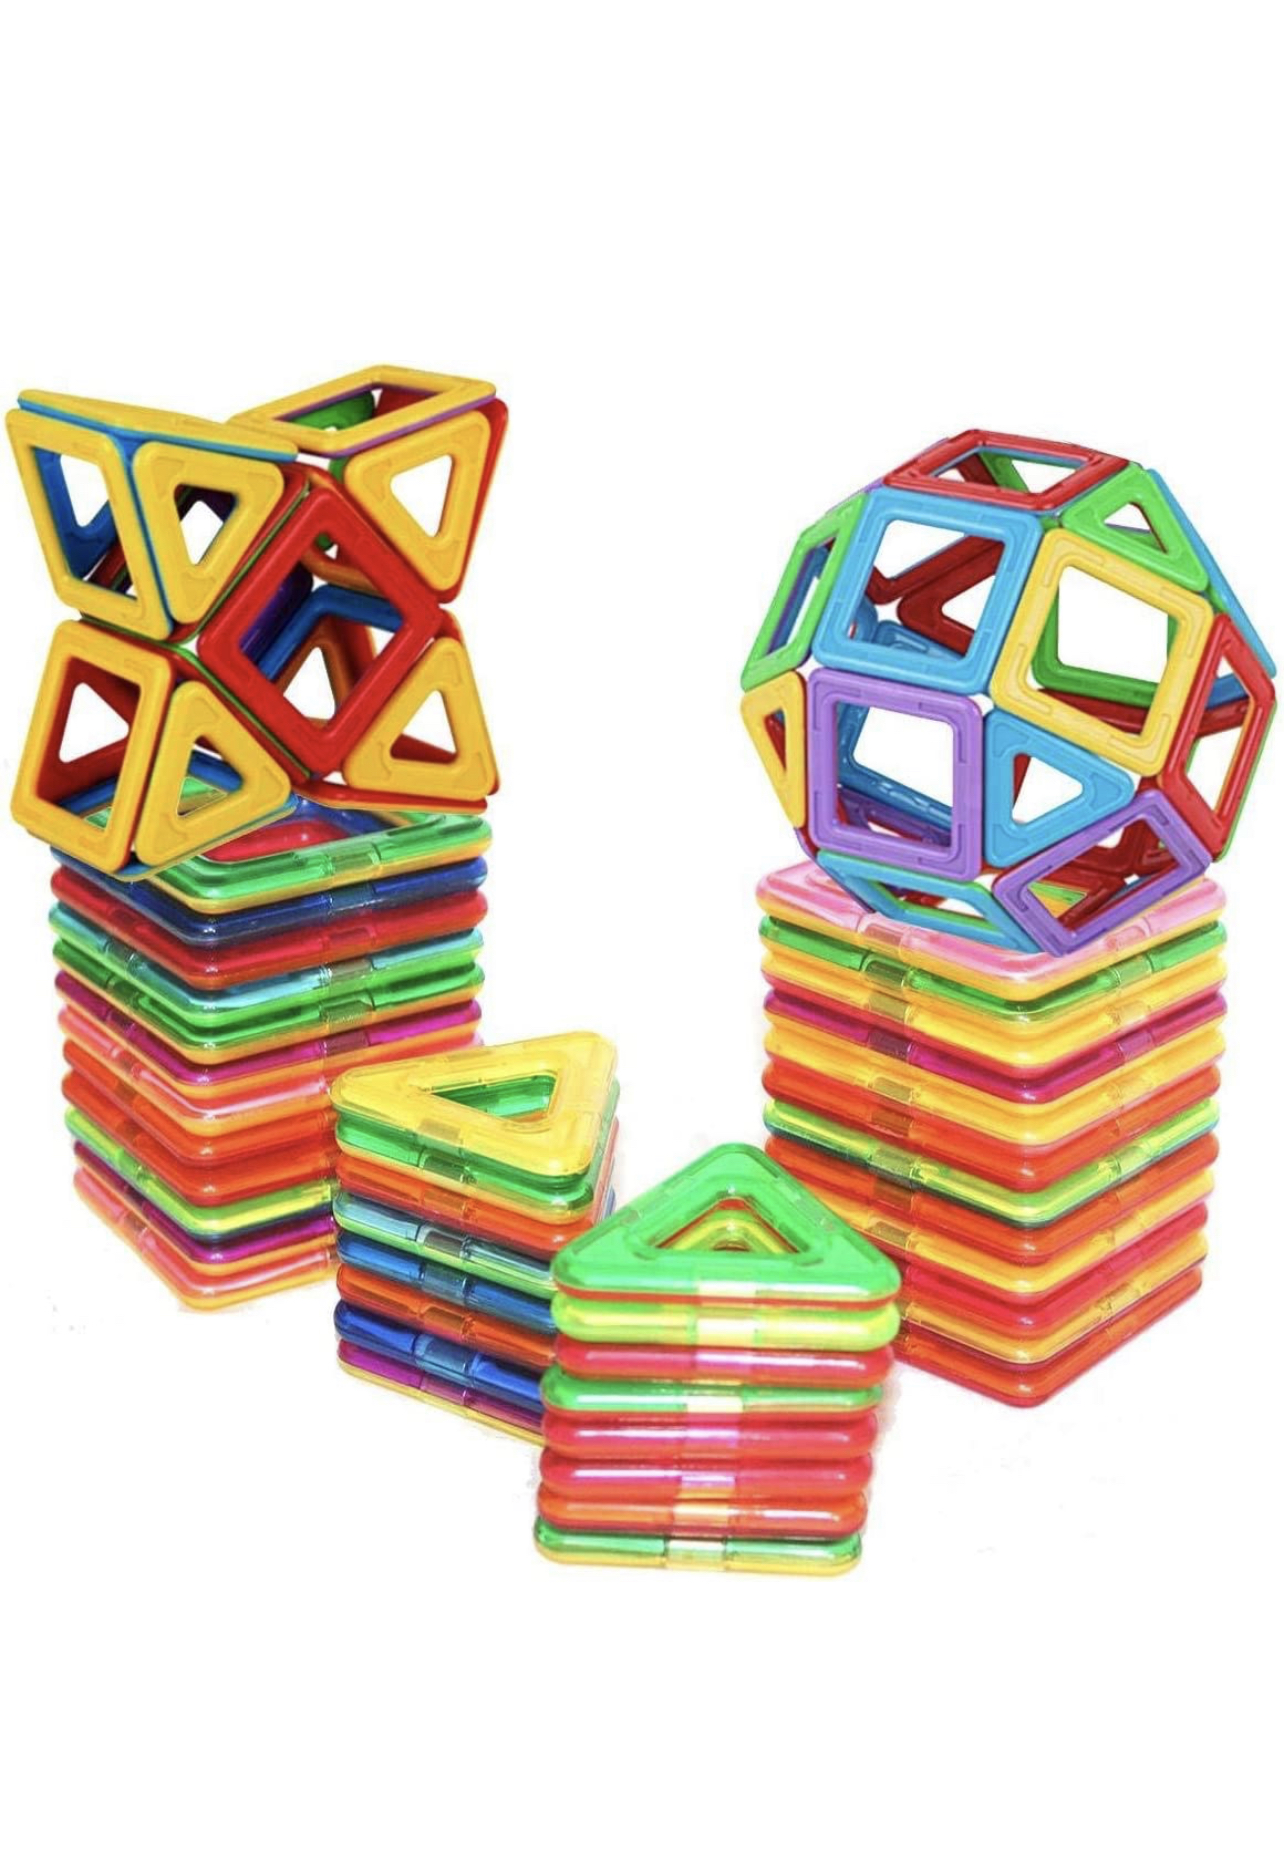 Magnetic block toy discount 80% off